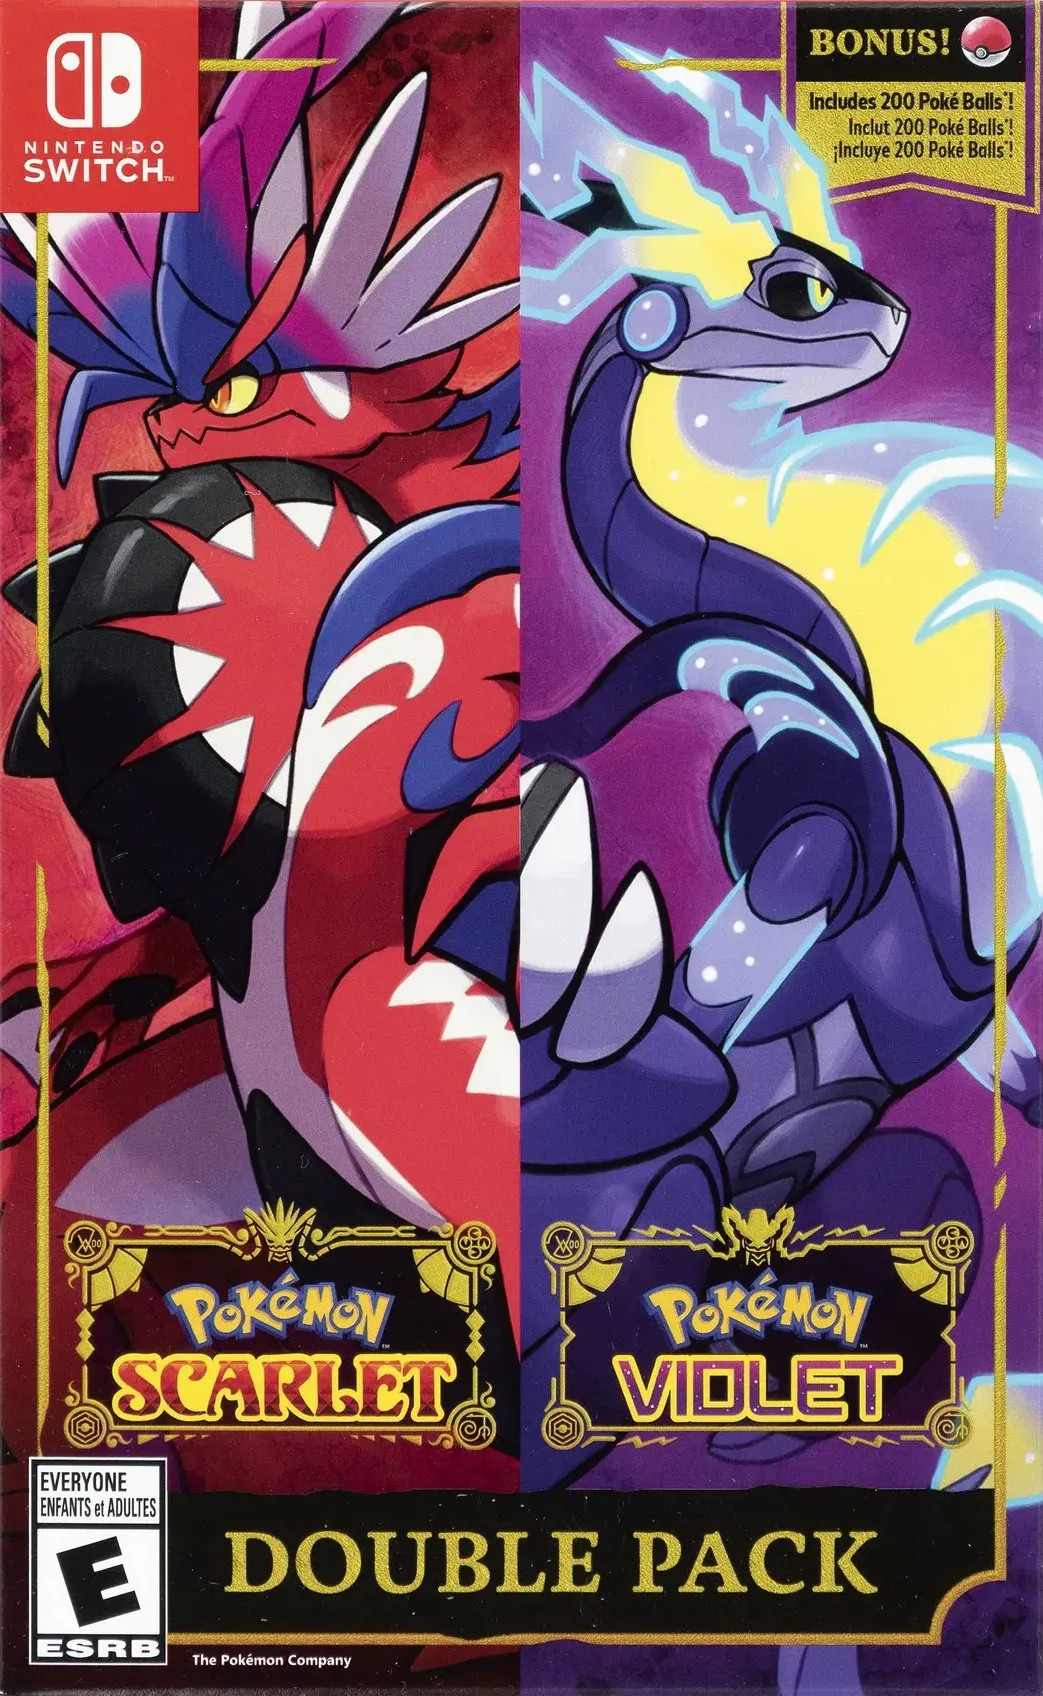 Pokemon Scarlet / Violet [Double Pack] Video Game